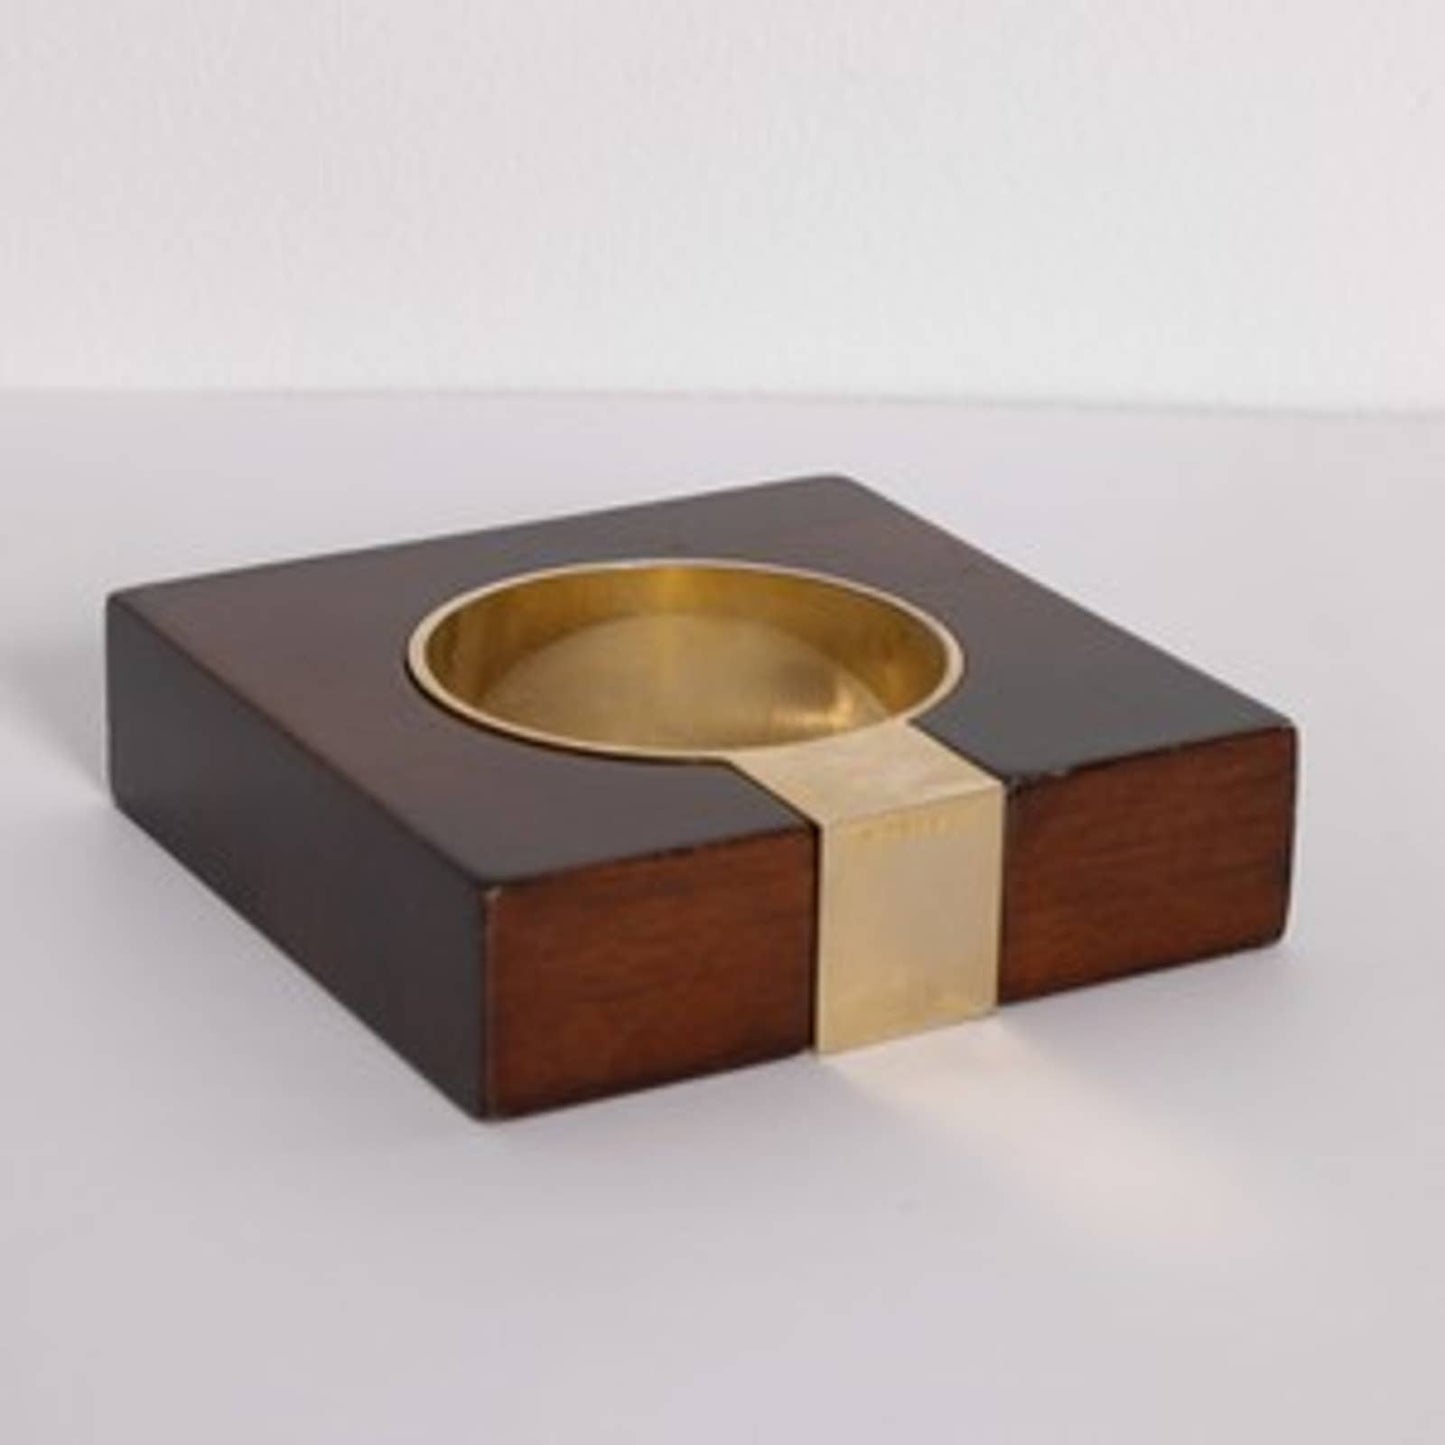 GIVENCHY PARIS Dark Wood with Gold Accents Square Bangle Bracelet